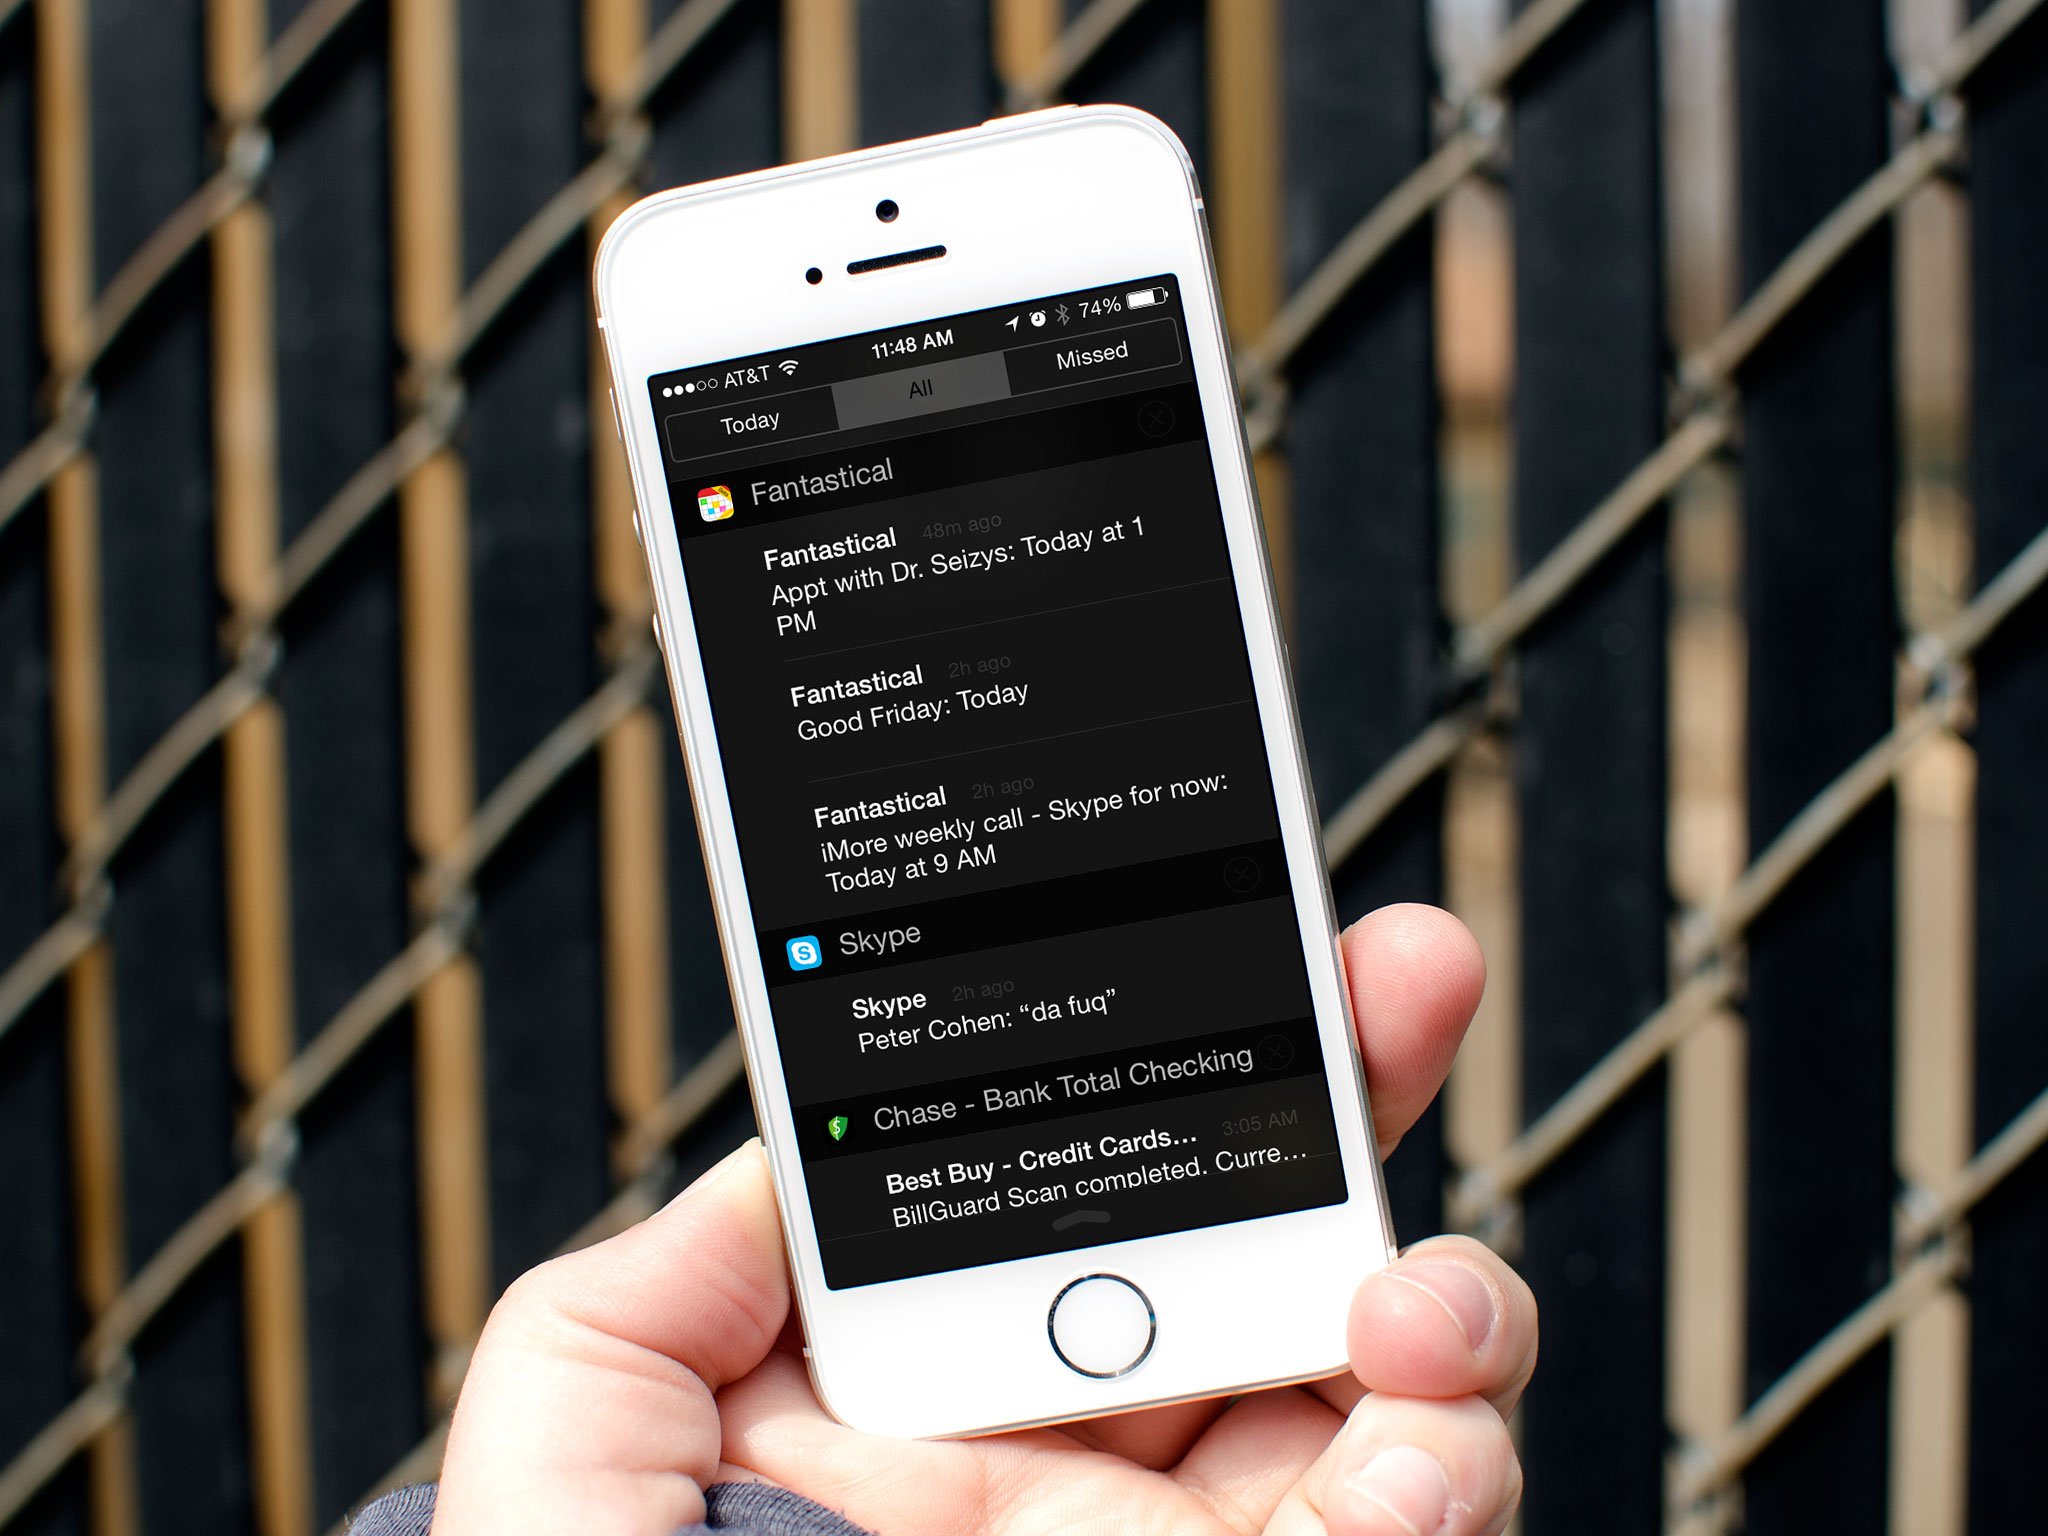 How to access Notification Center on iPhone, iPad, and iPod touch